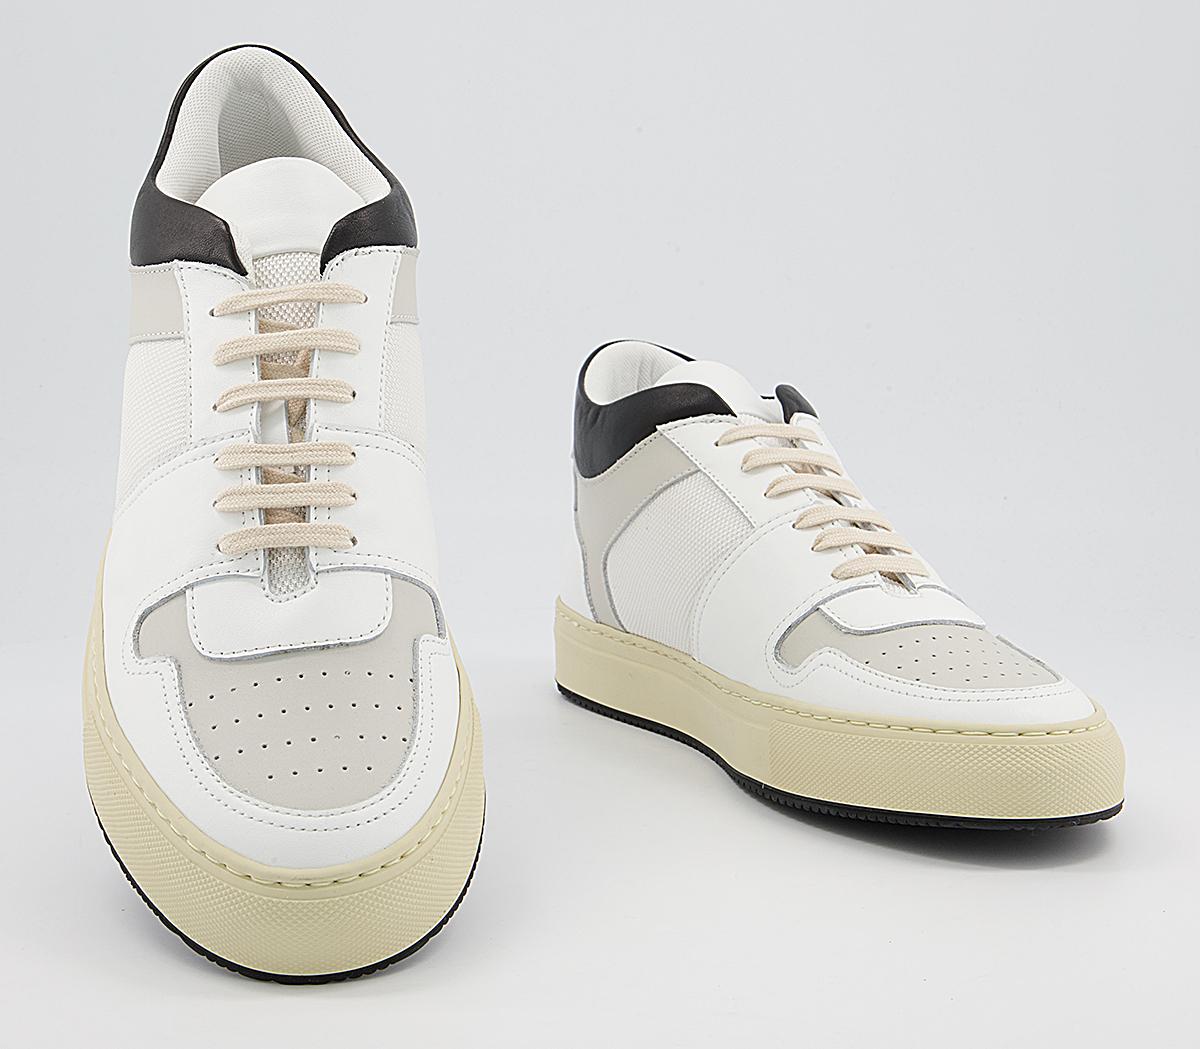 Common Projects Bball Low Decades Trainers White Black - Women's ...